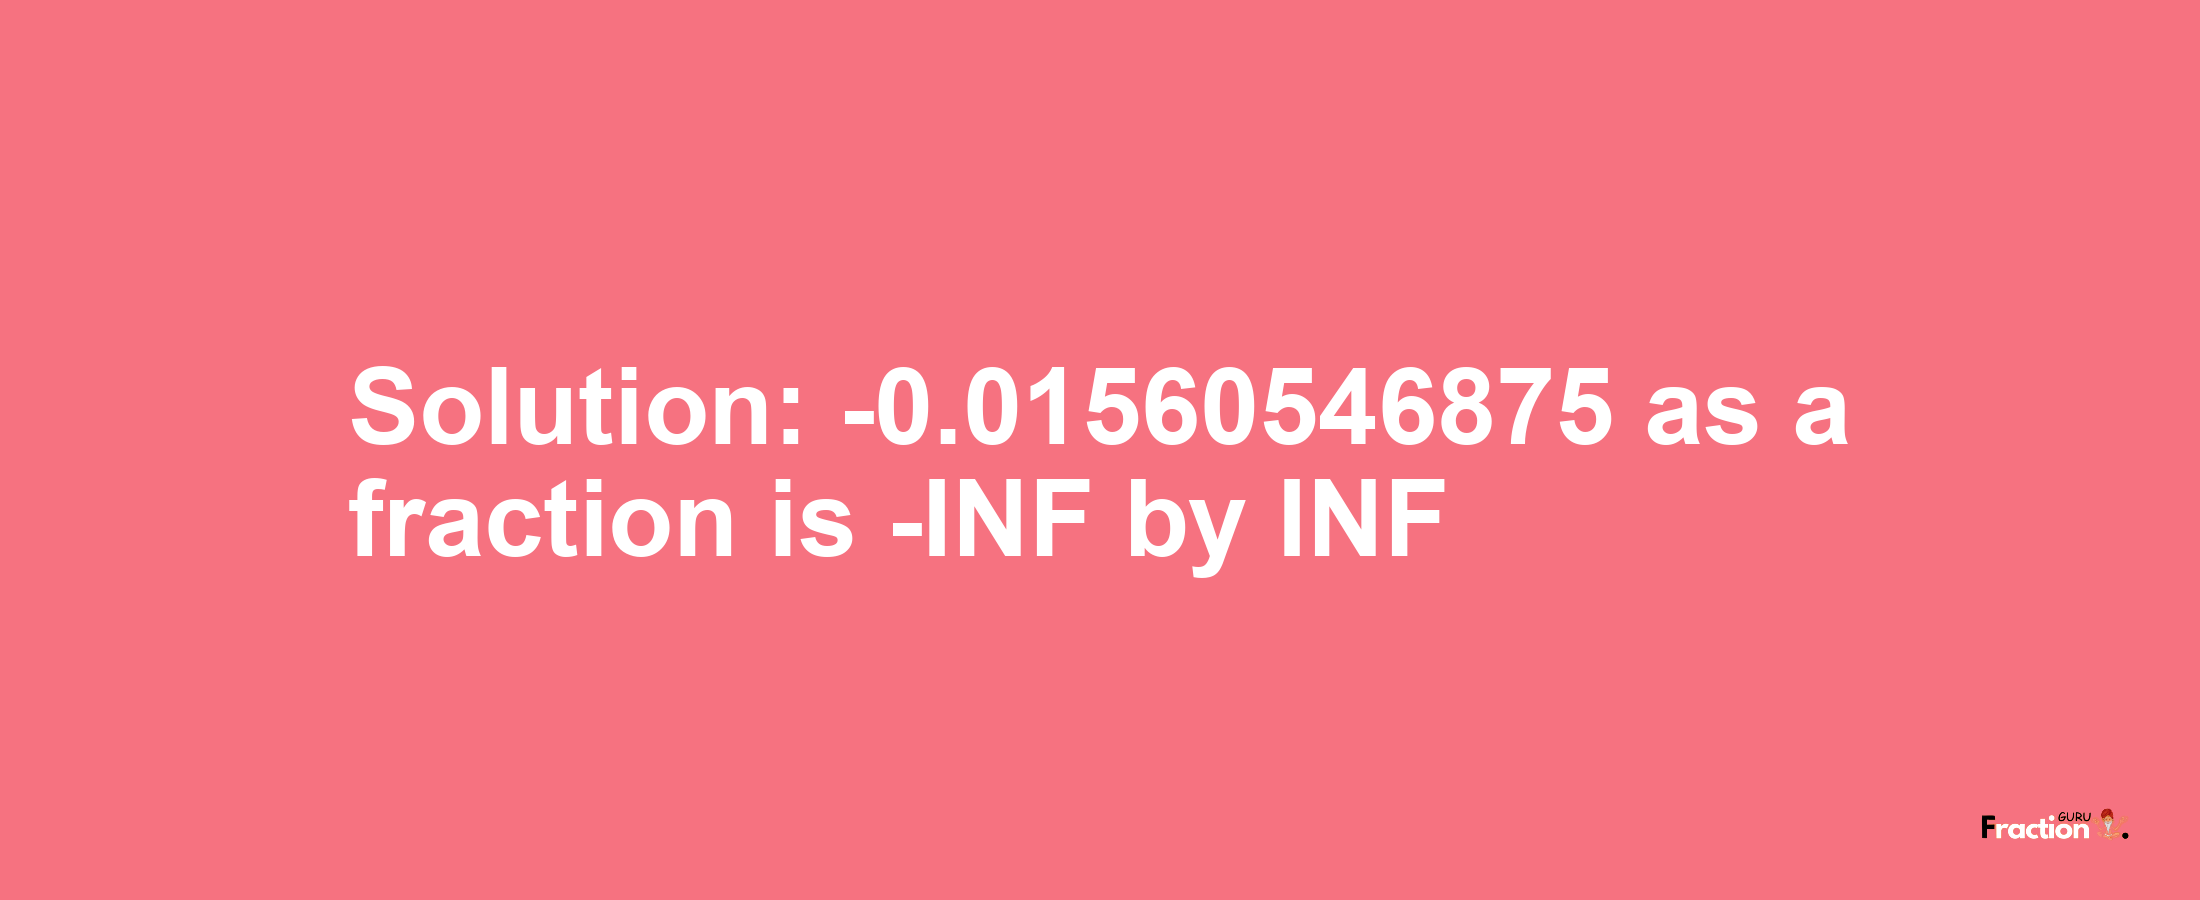 Solution:-0.01560546875 as a fraction is -INF/INF